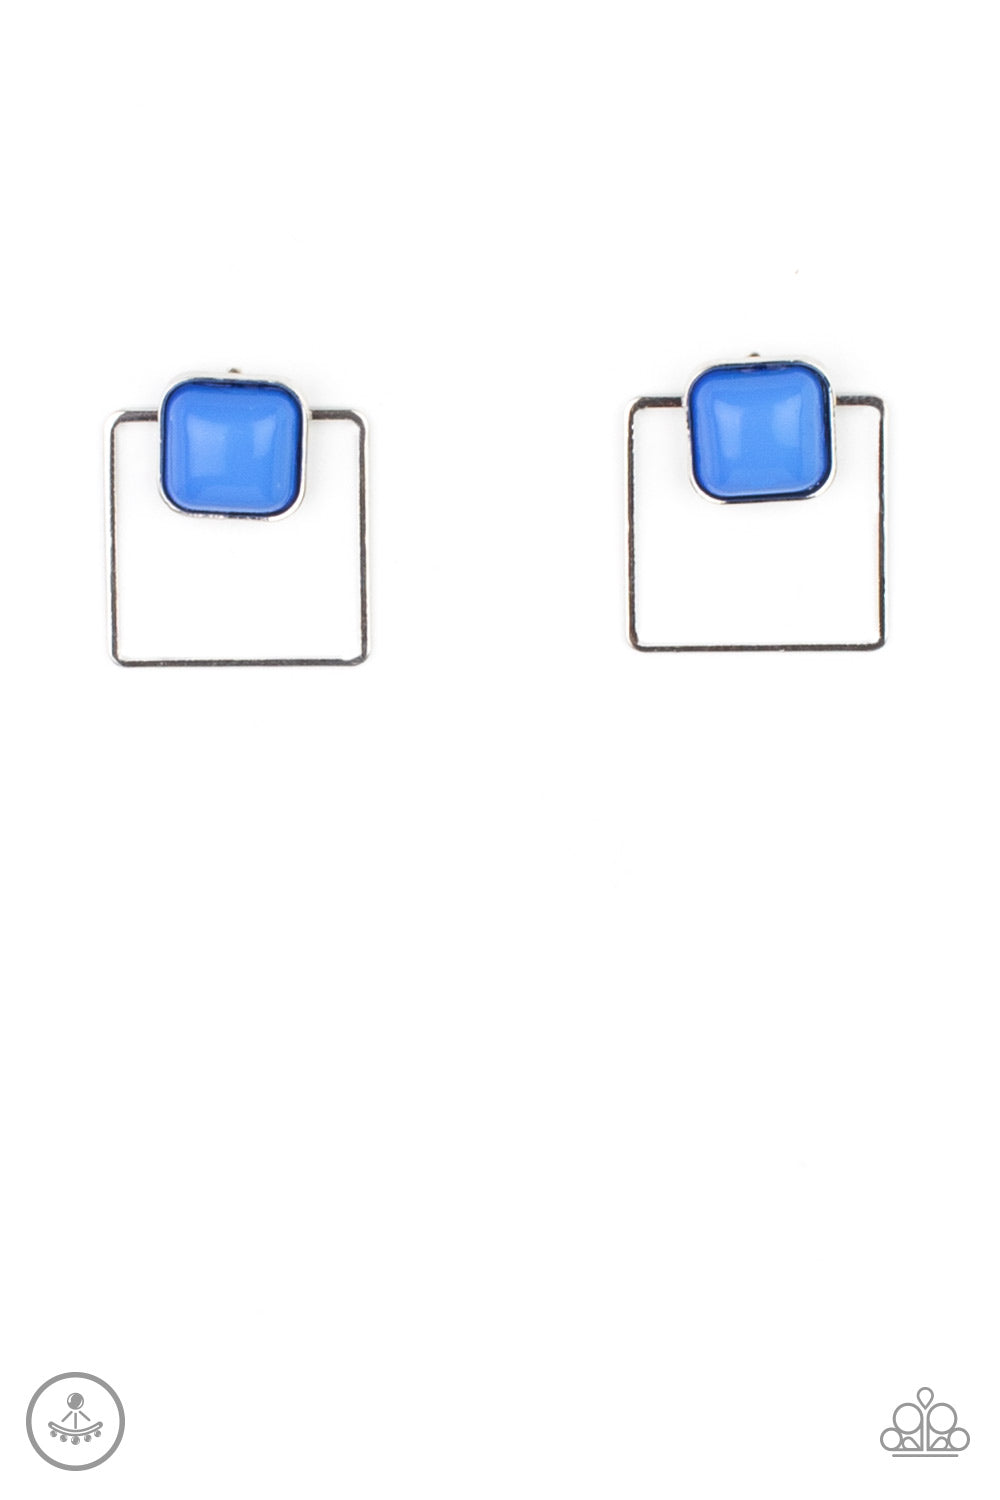 FLAIR and Square - Blue